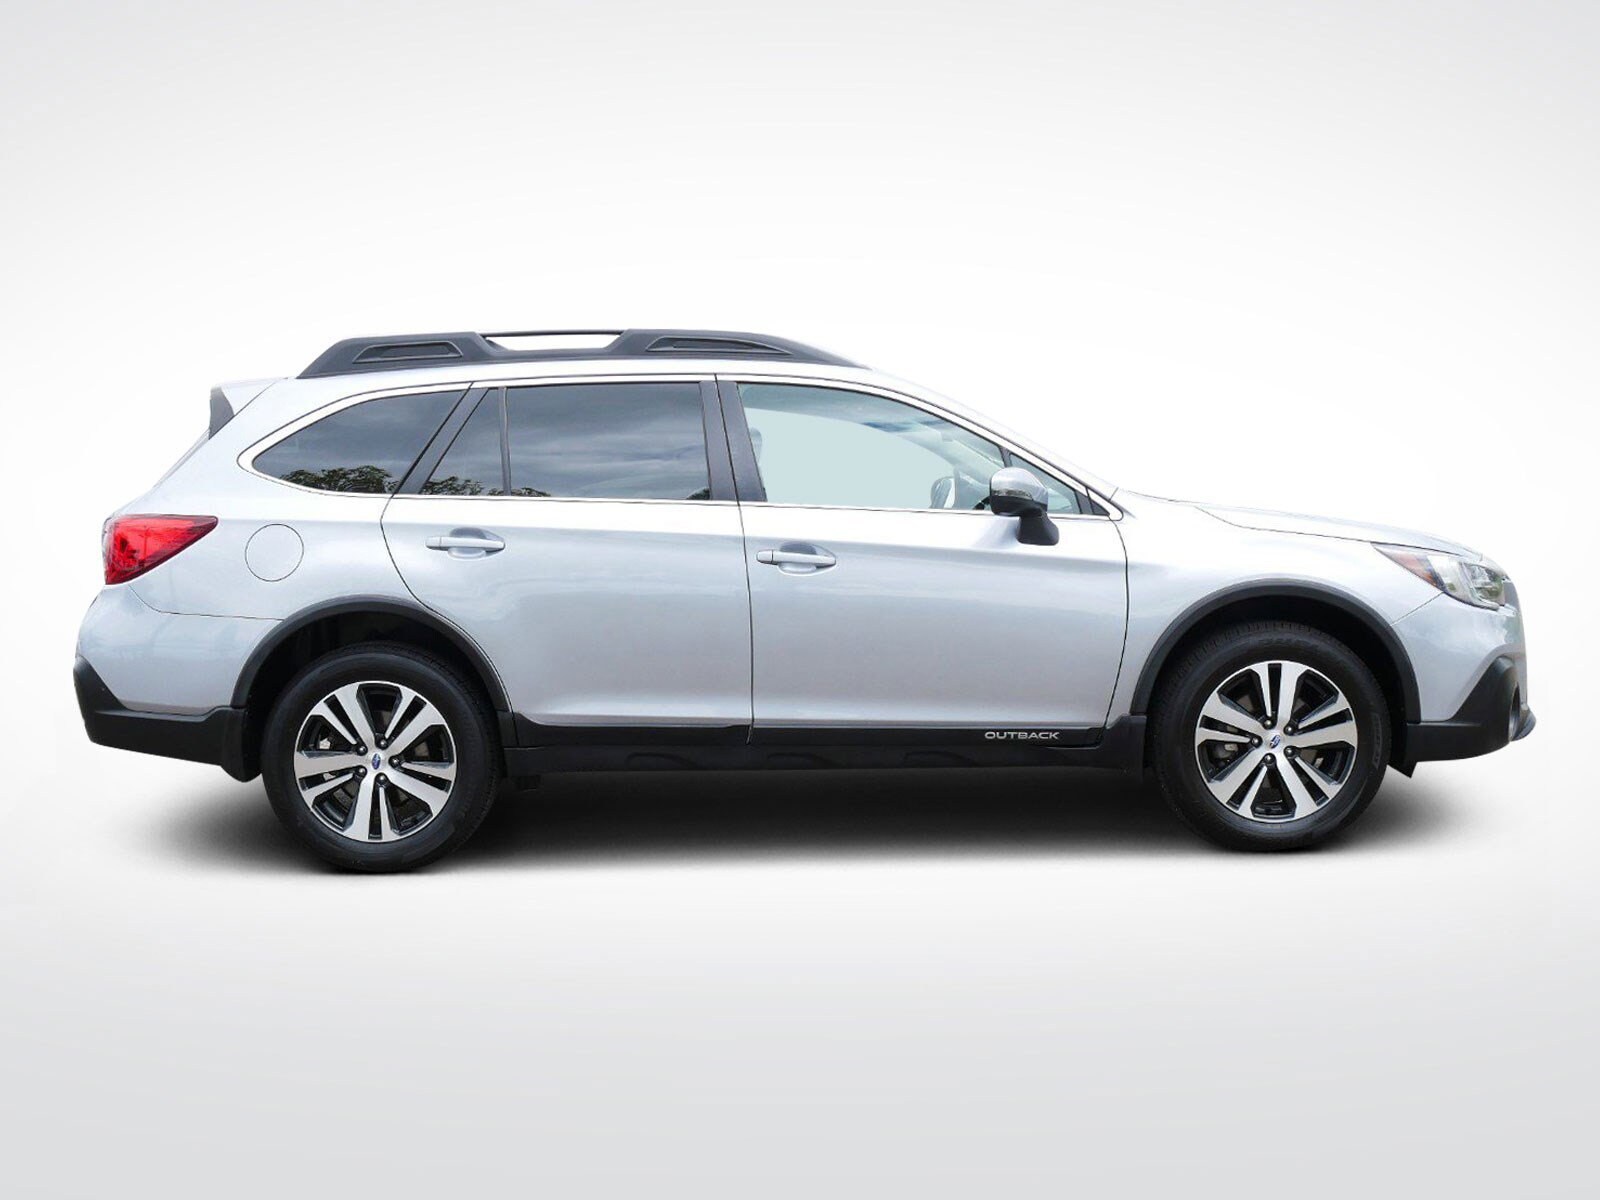 Used 2019 Subaru Outback Limited with VIN 4S4BSENCXK3274158 for sale in Baxter, Minnesota